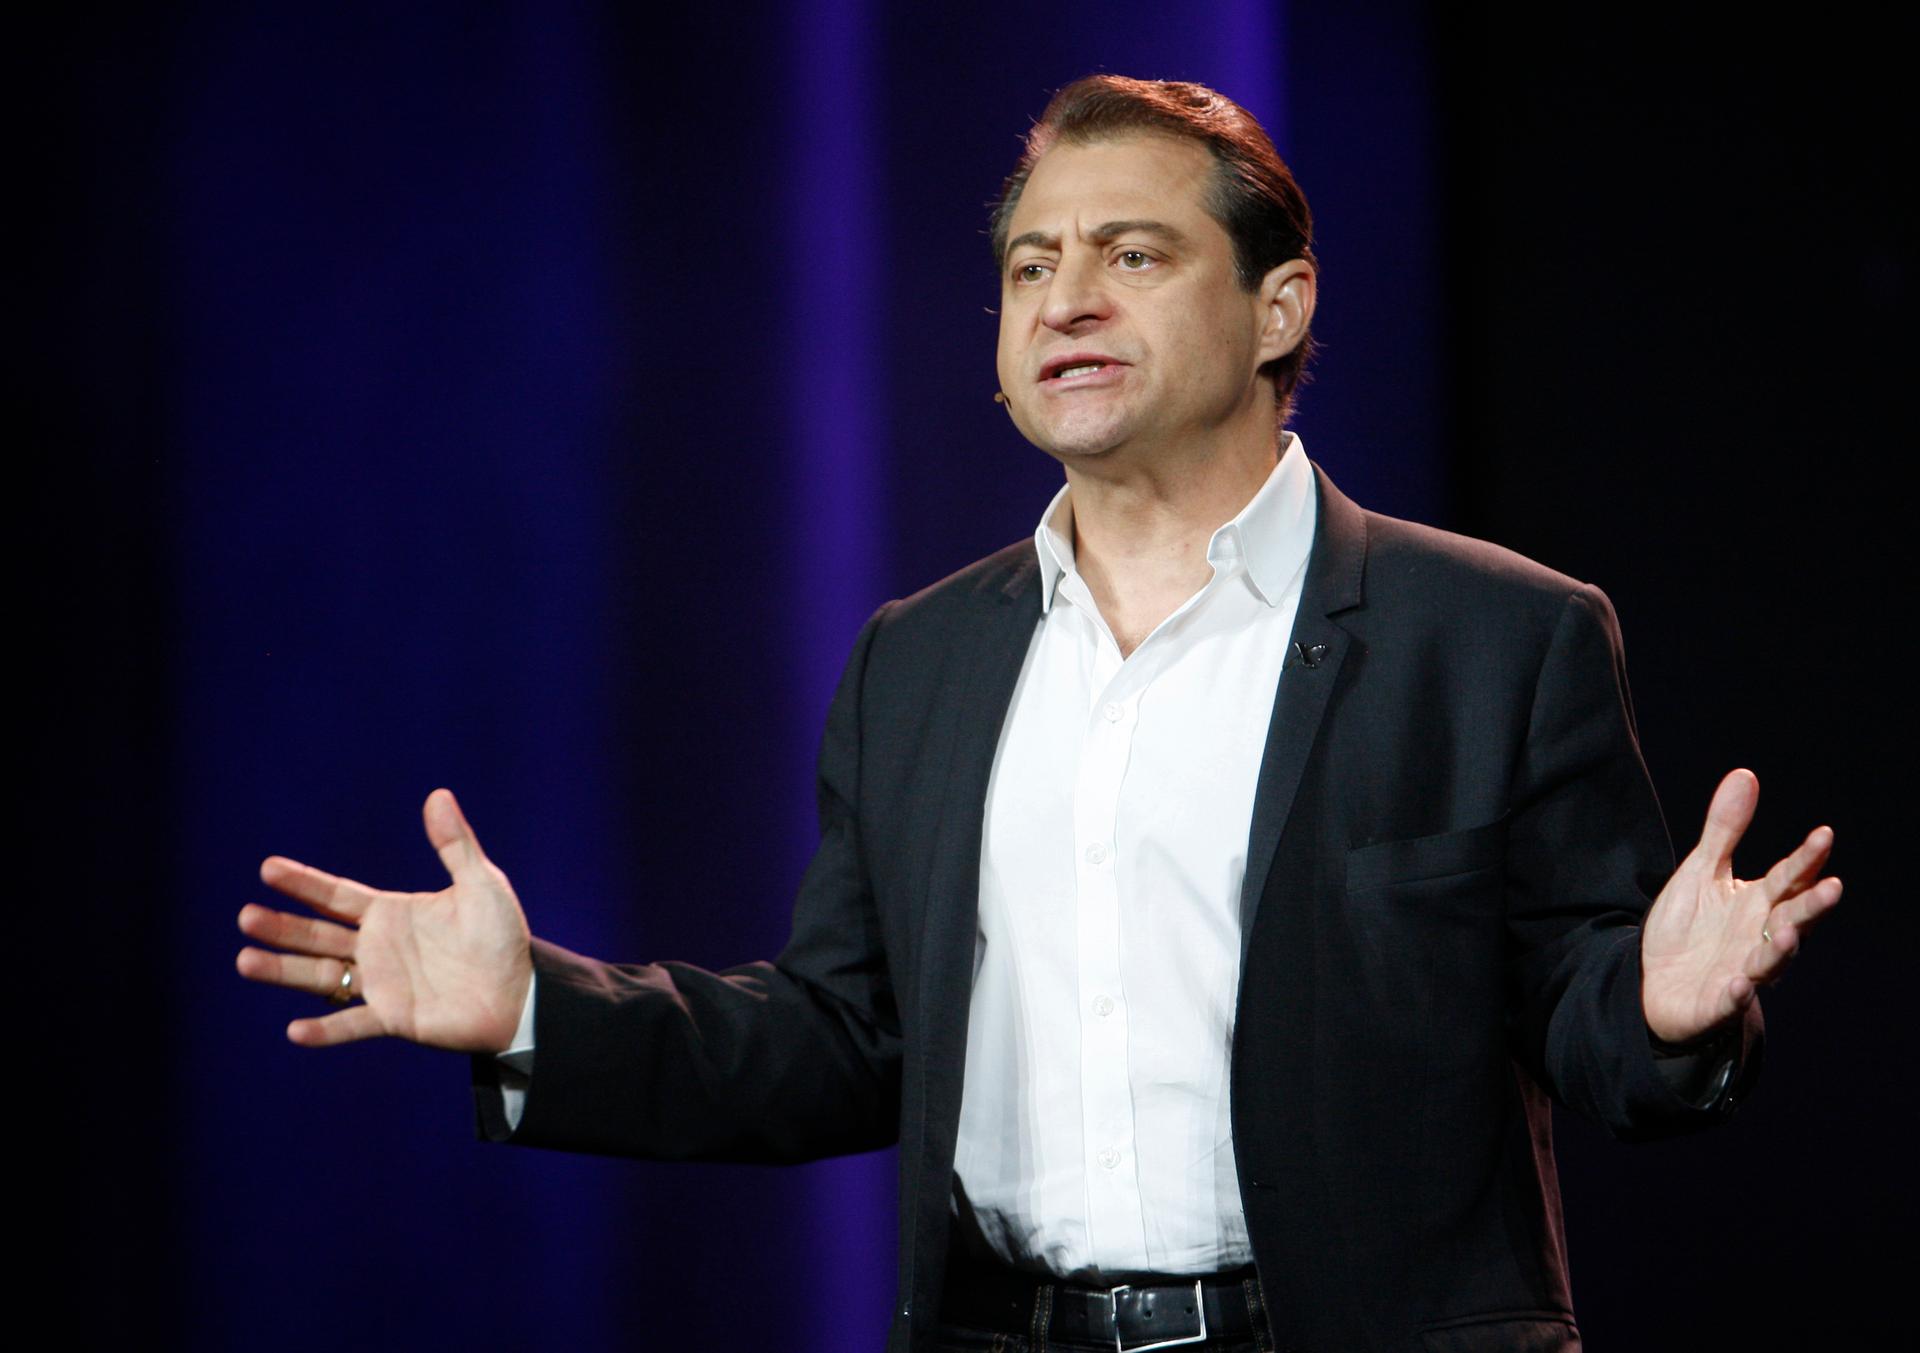 Peter Diamandis, chairman and CEO of the X Prize foundation, speaks about the "tricorder" prize during a keynote address at the 2012 International Consumer Electronics Show in Las Vegas.